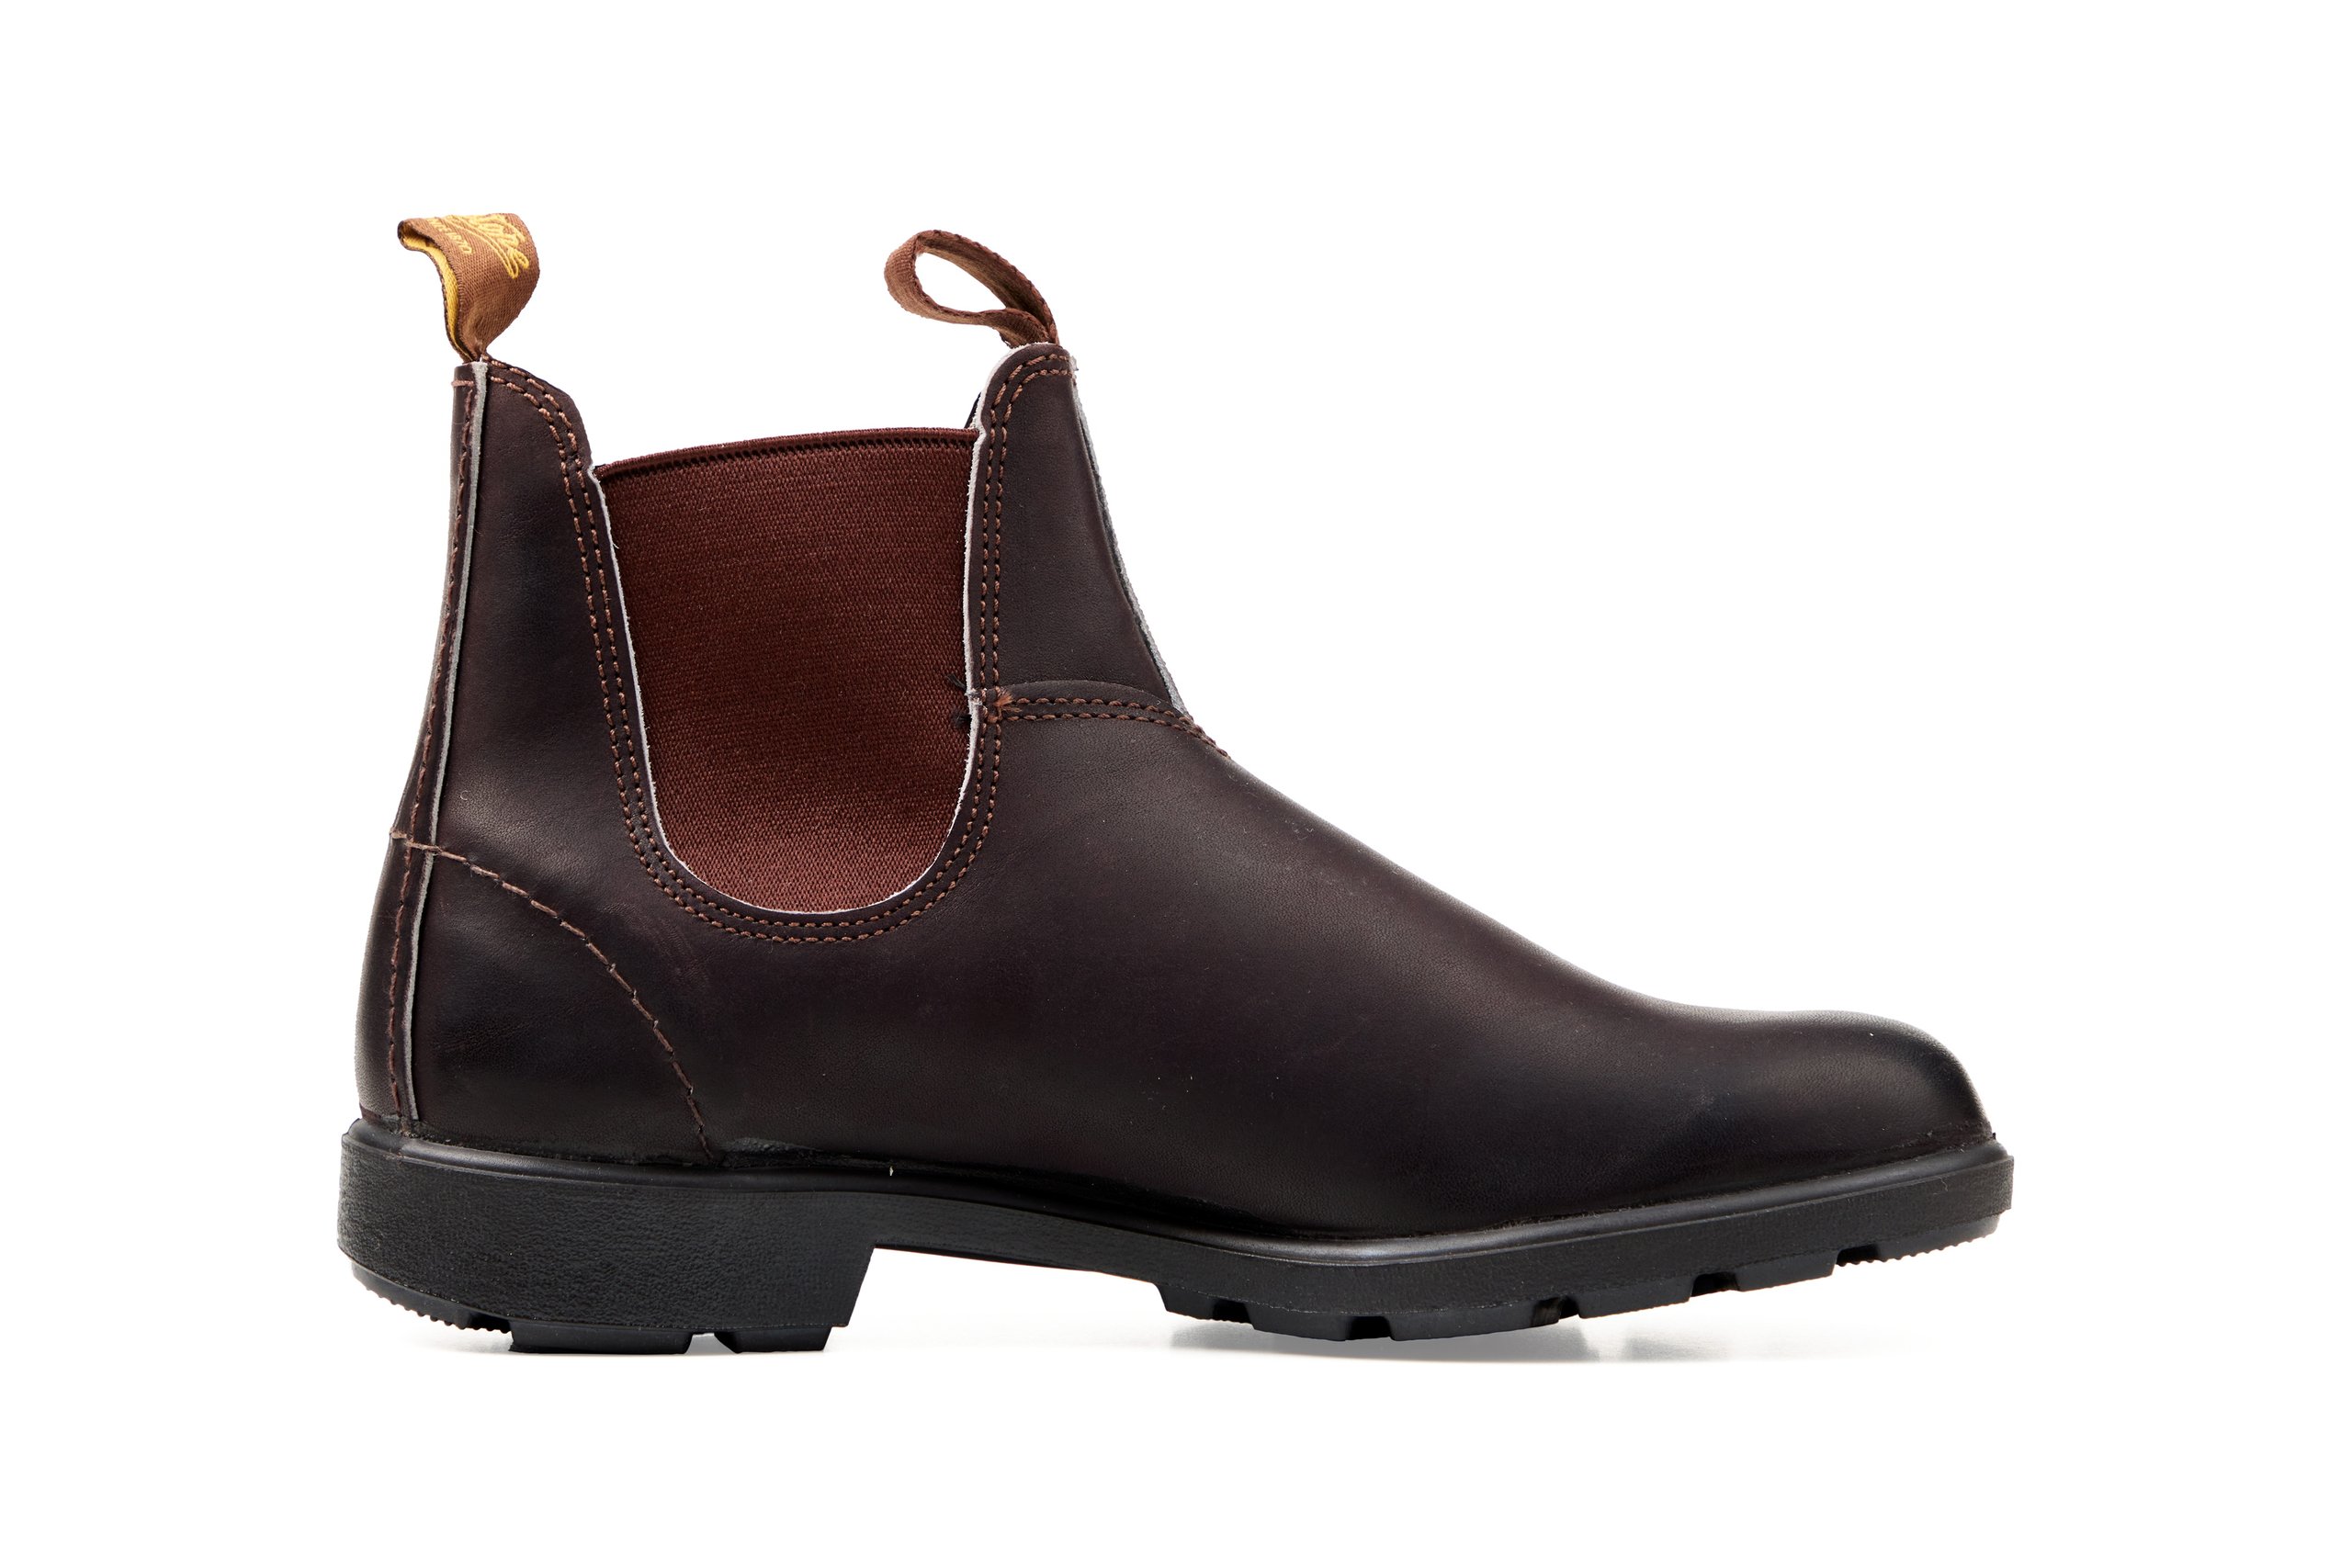 Pair of '505' unisex boots with shoebox by Blundstone